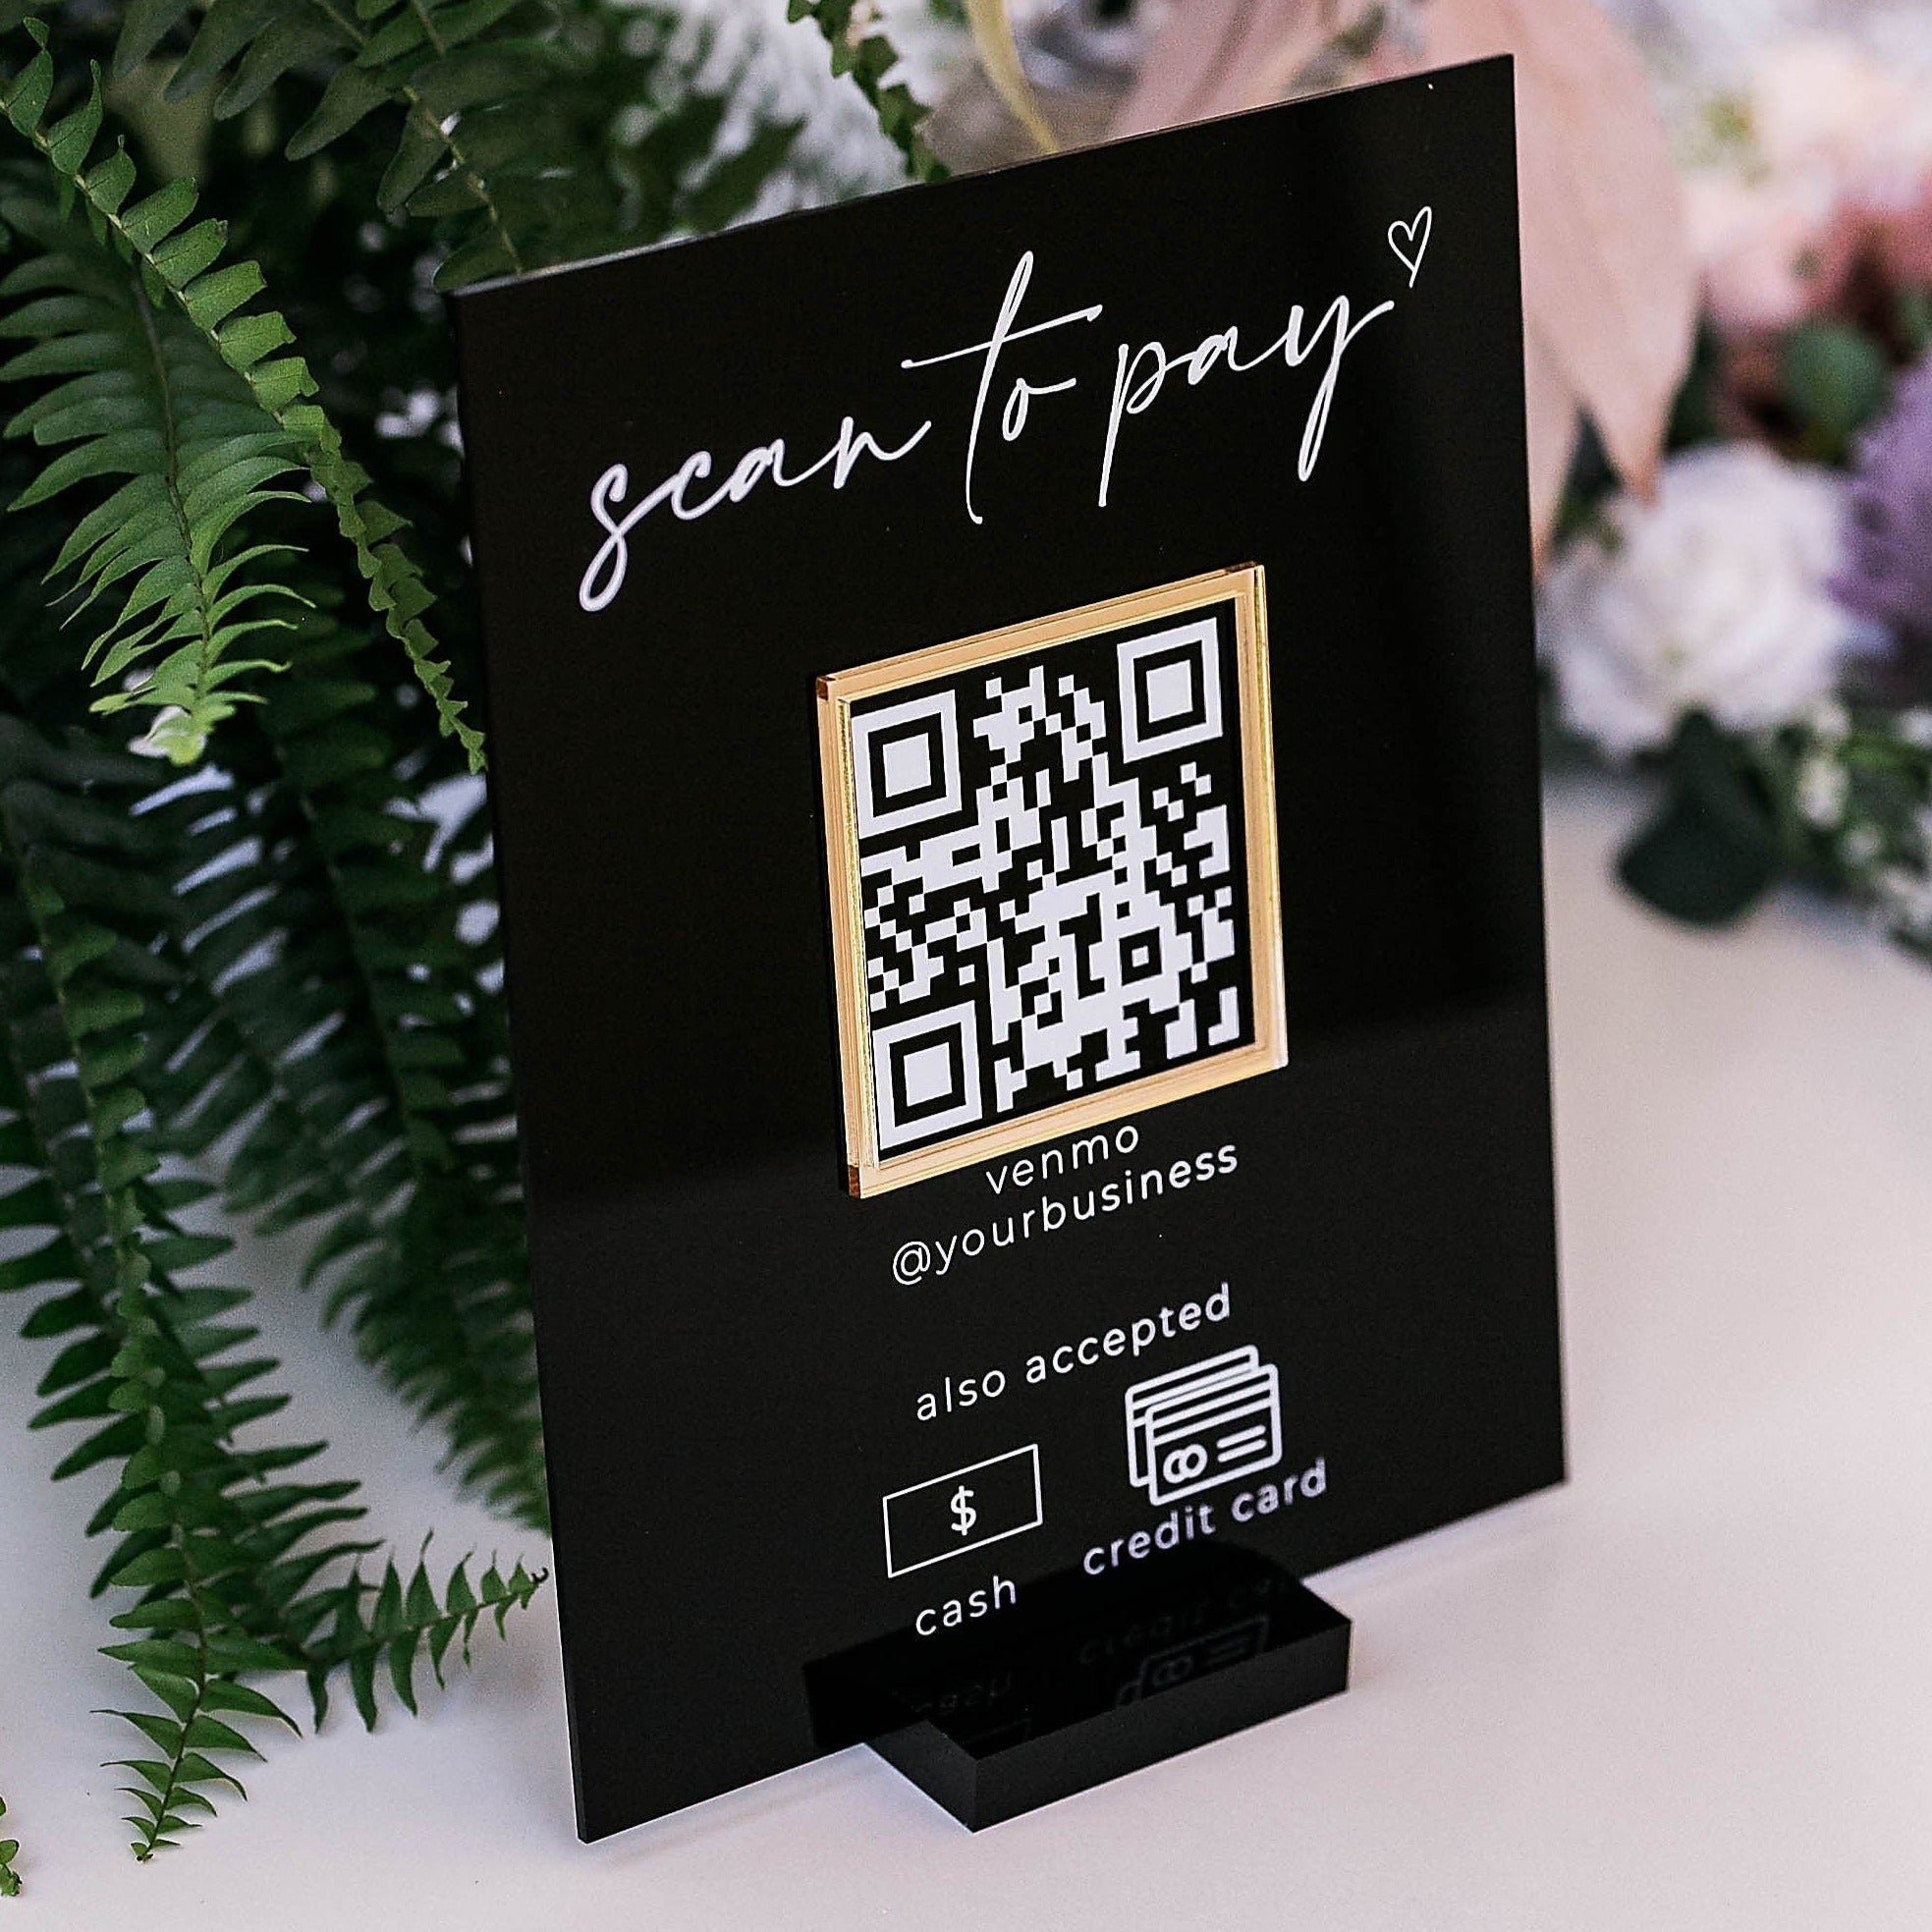 3D Scan To Pay Retail Scannable QR Code Clear Glass Look Acrylic Sign, Instagram Hashtag Plexiglass Perspex Lucite Table Sign